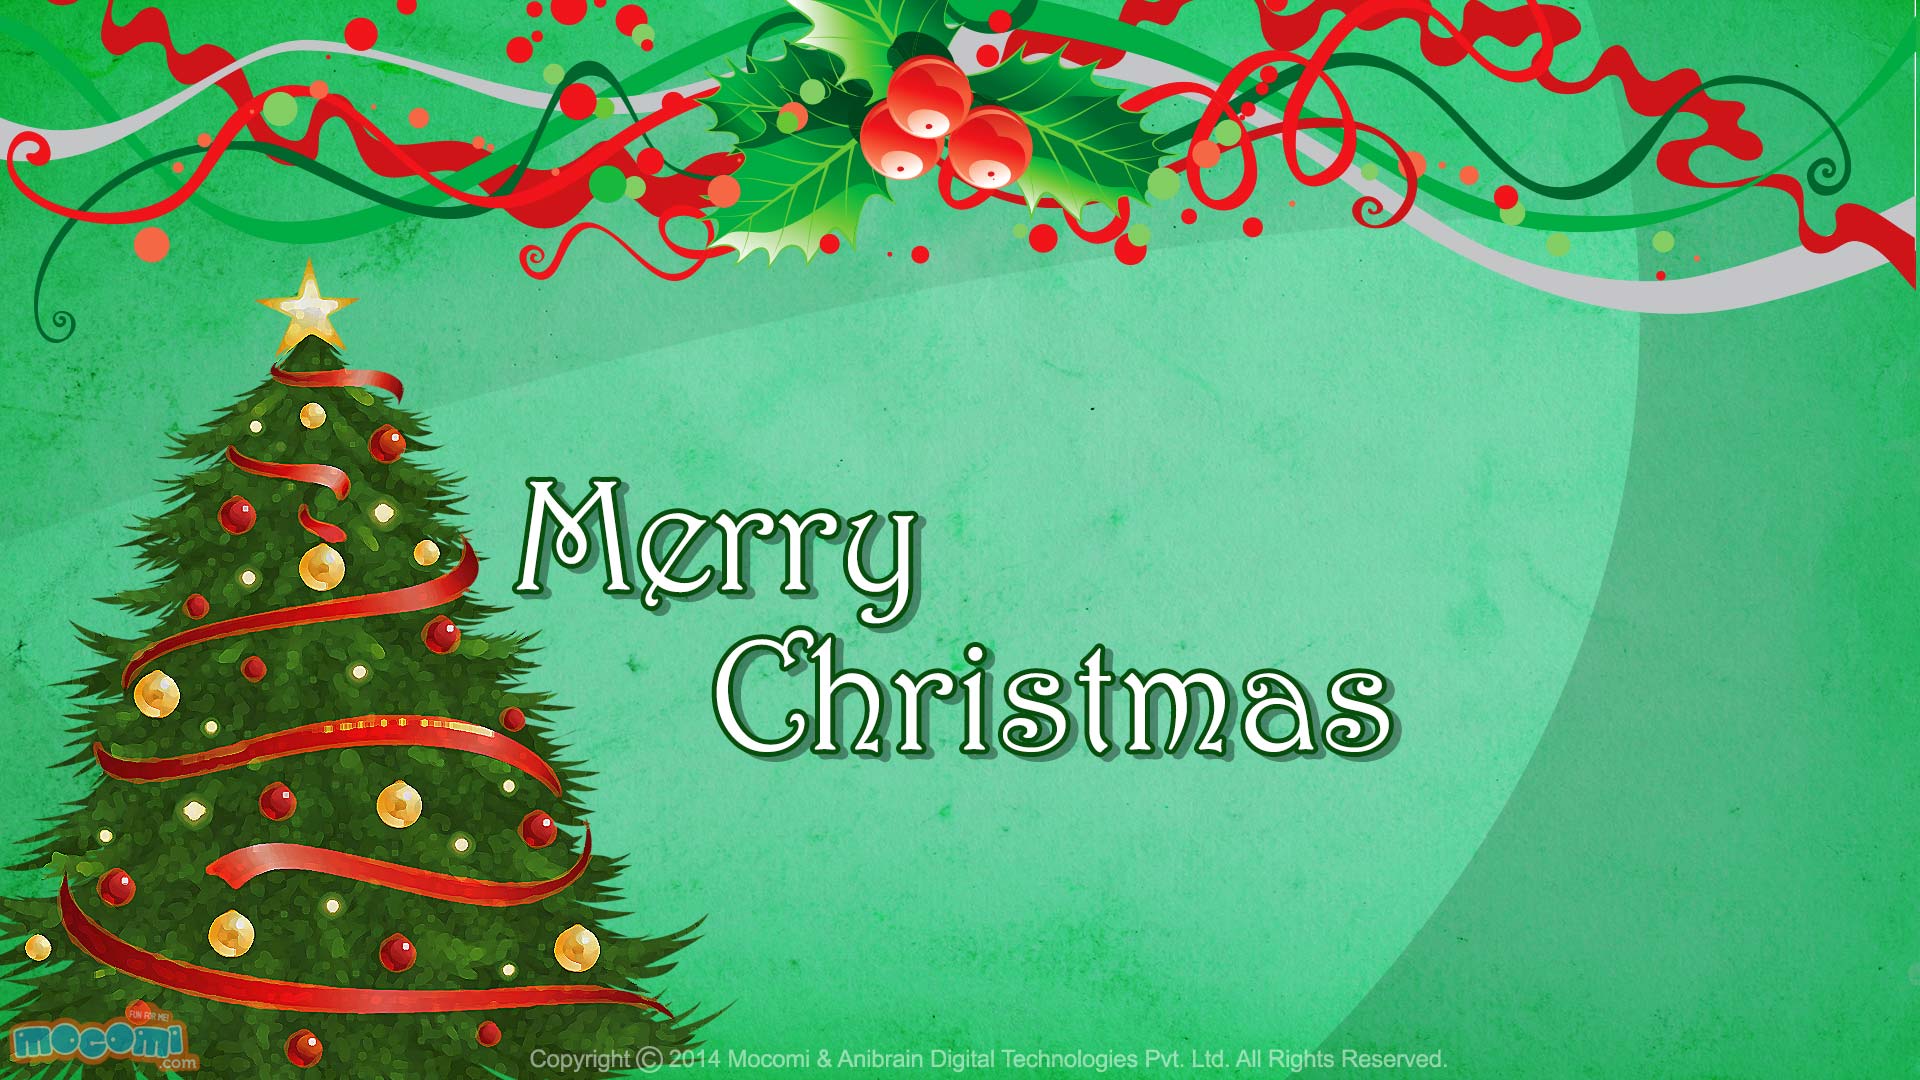 Merry Christmas- Holly Wallpaper for Kids